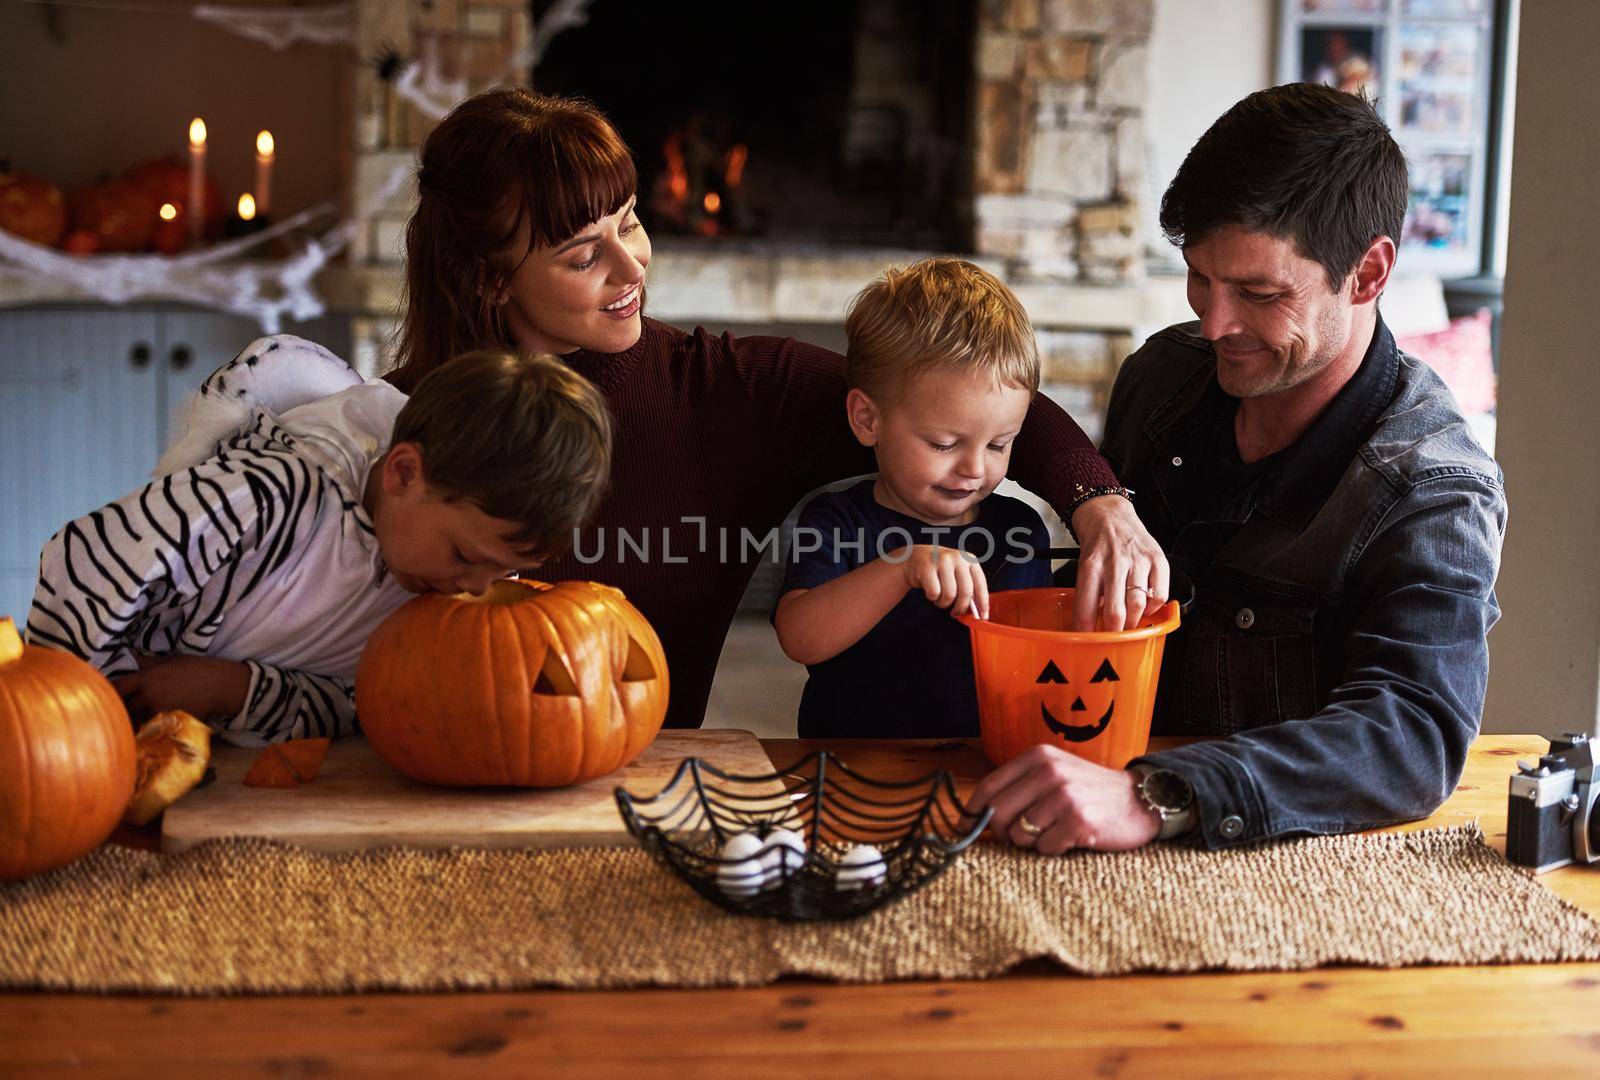 Were digging into the halloween festivities. Shot of an adorable young family carving out pumpkins and celebrating halloween together at home. by YuriArcurs